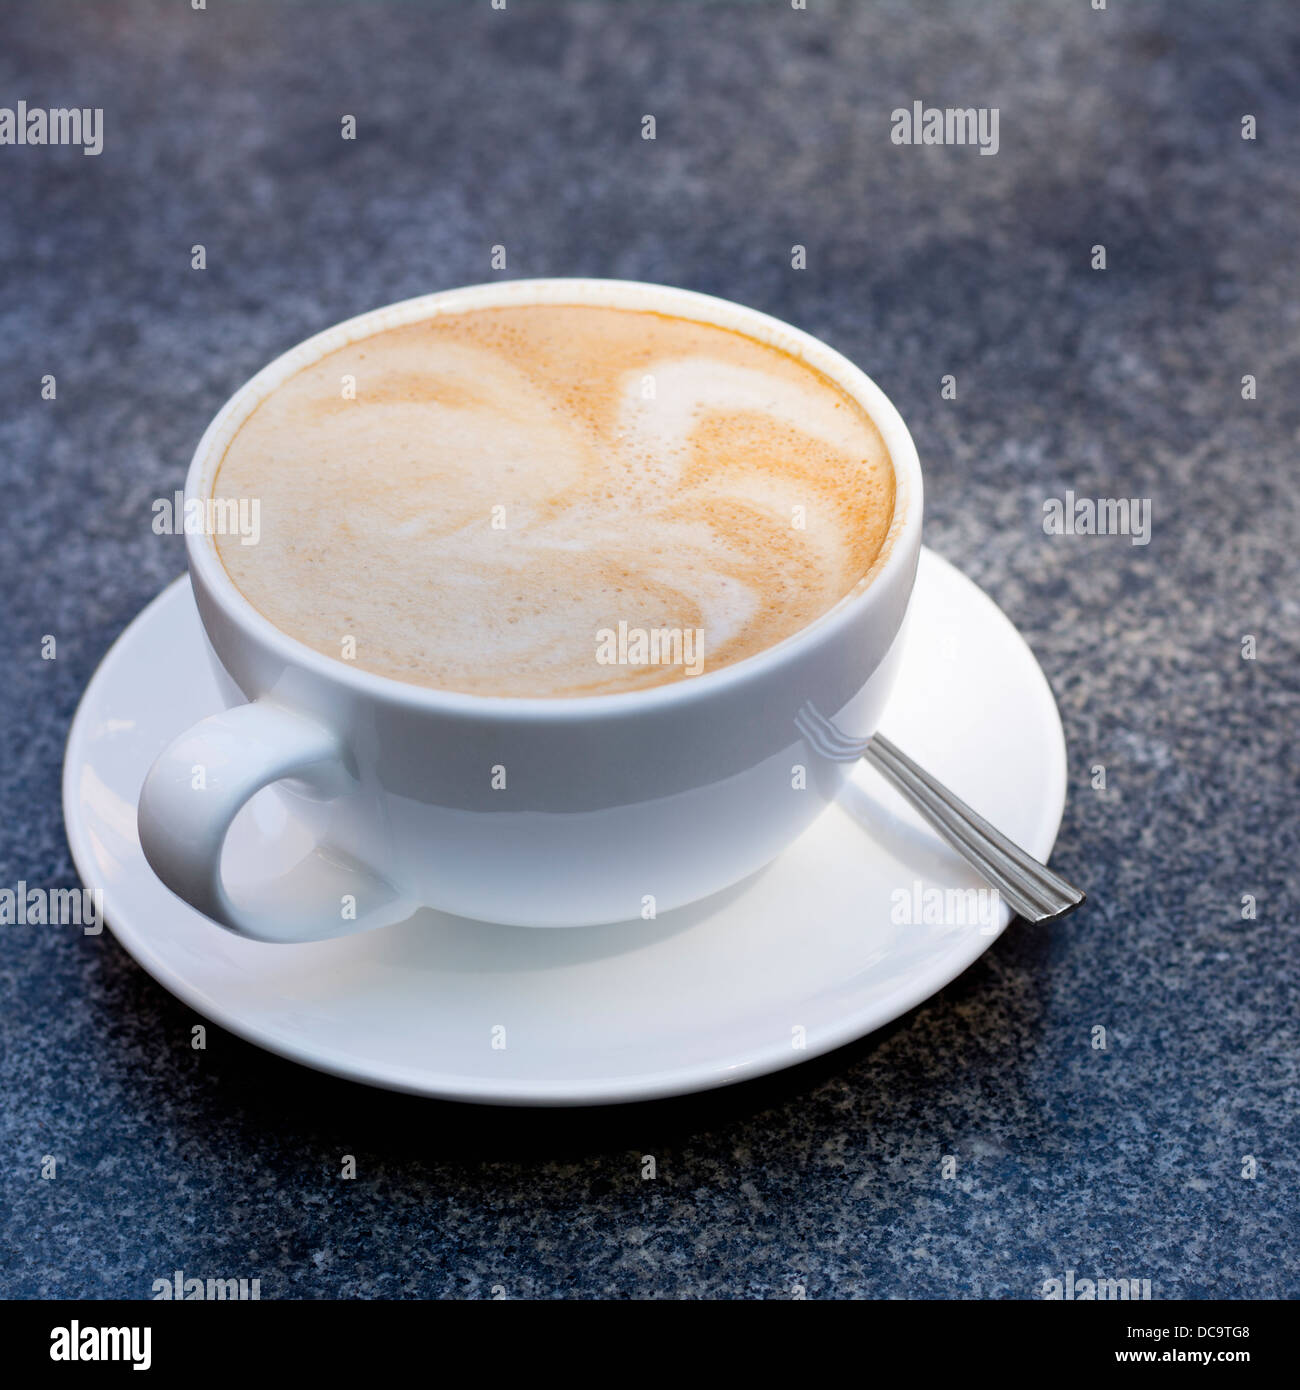 Coffee drink, soy latte, with saucer and spoon Stock Photo